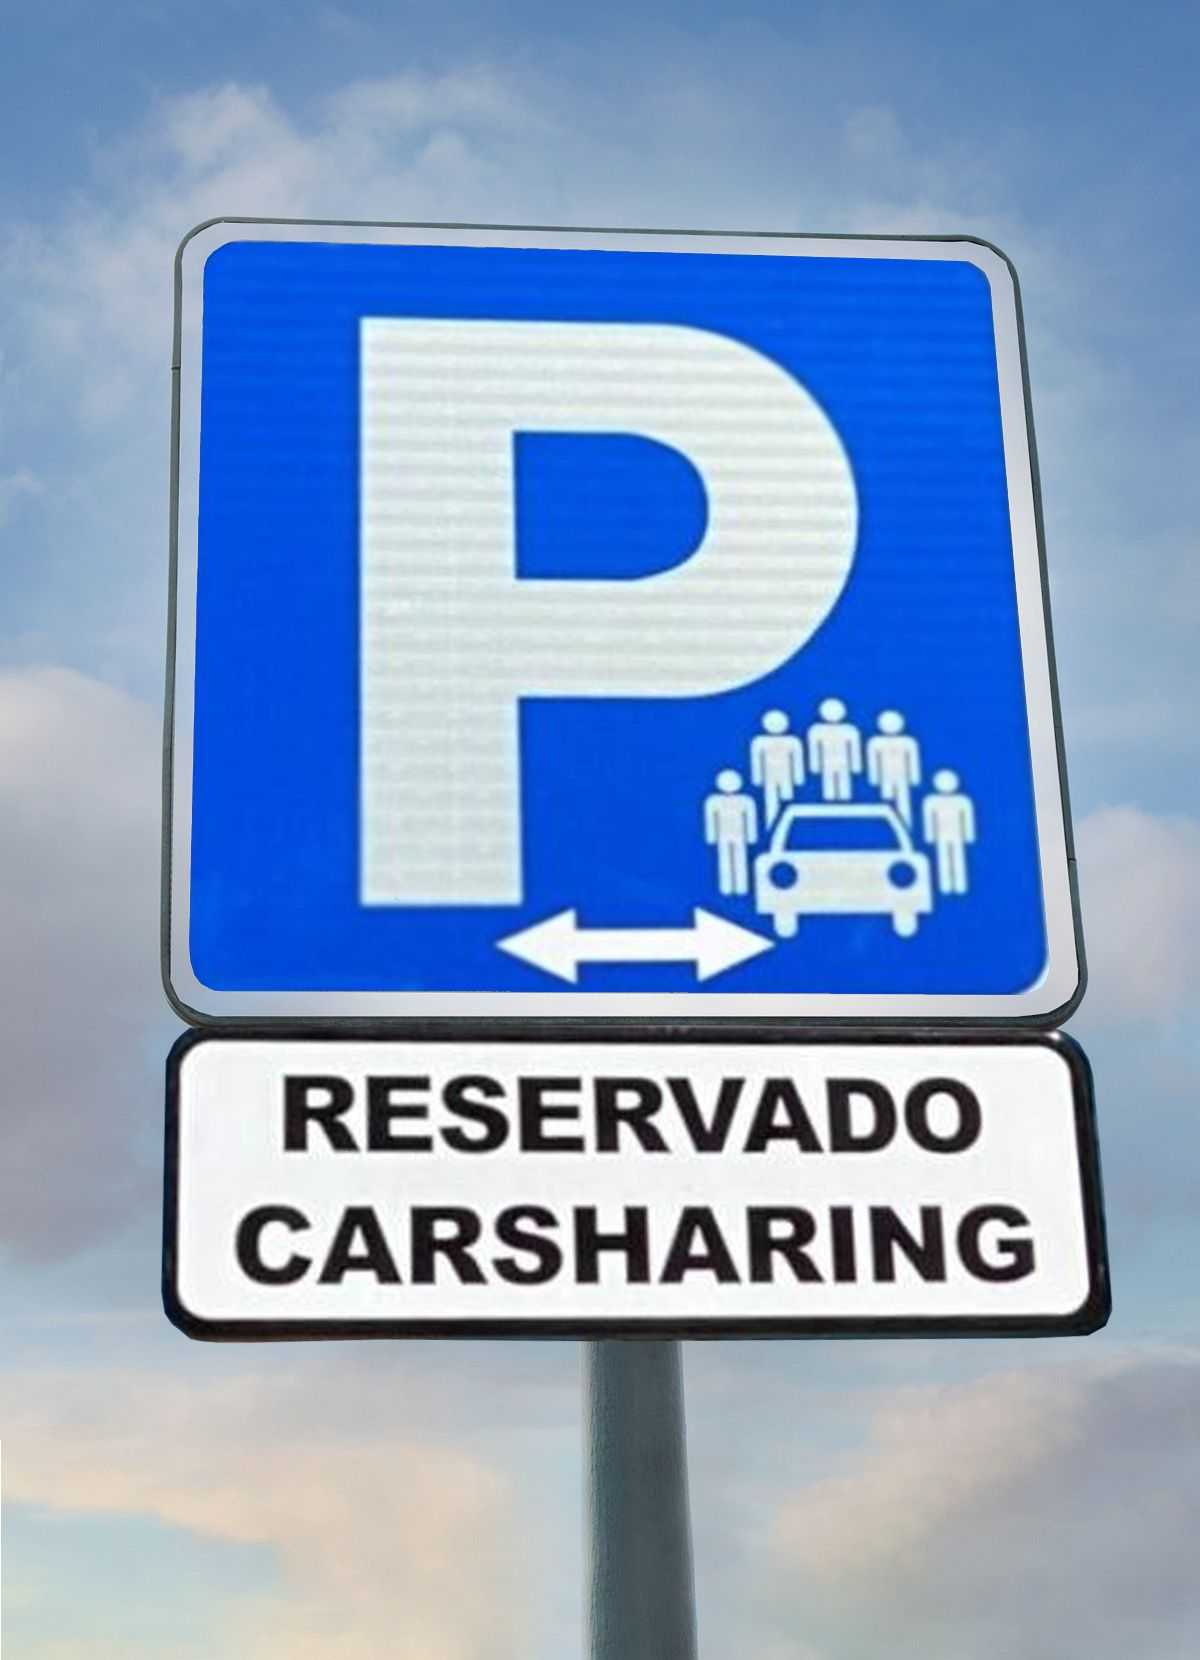 parking-carsharing-madrid-coches-compartidos-voltio.jpg